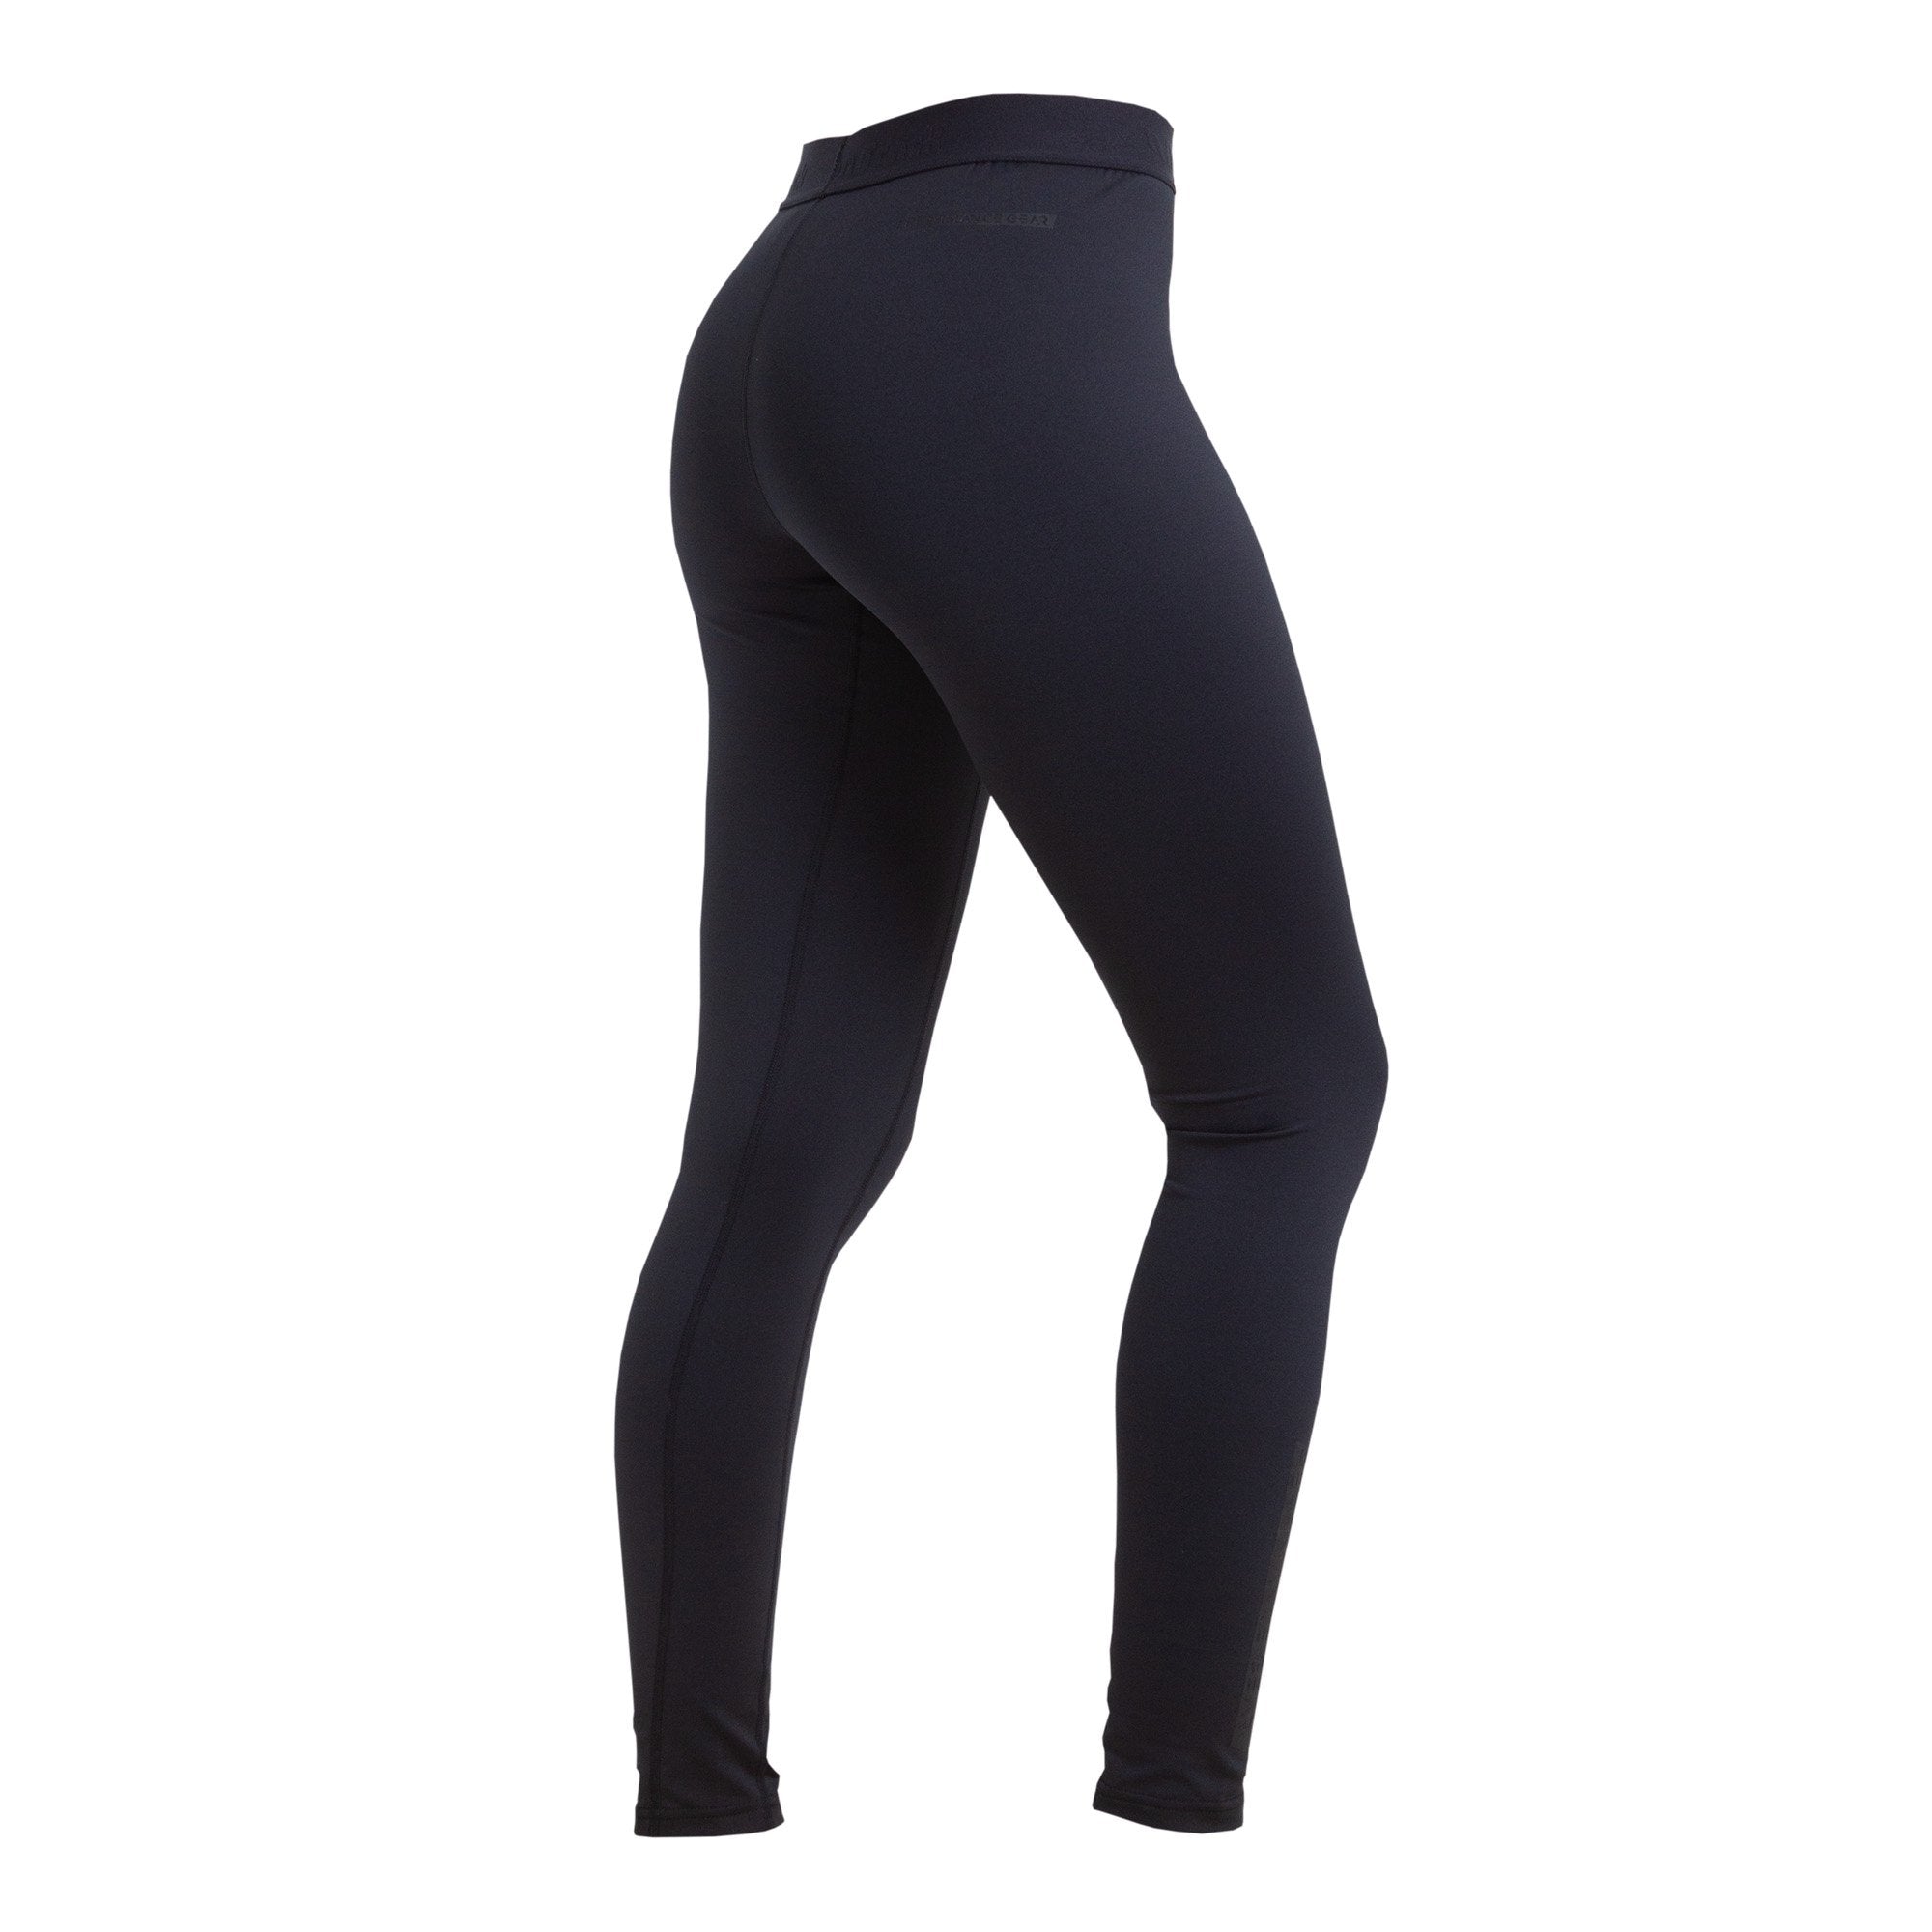 Cate P4G Women’s Tights | Back on Track Canada